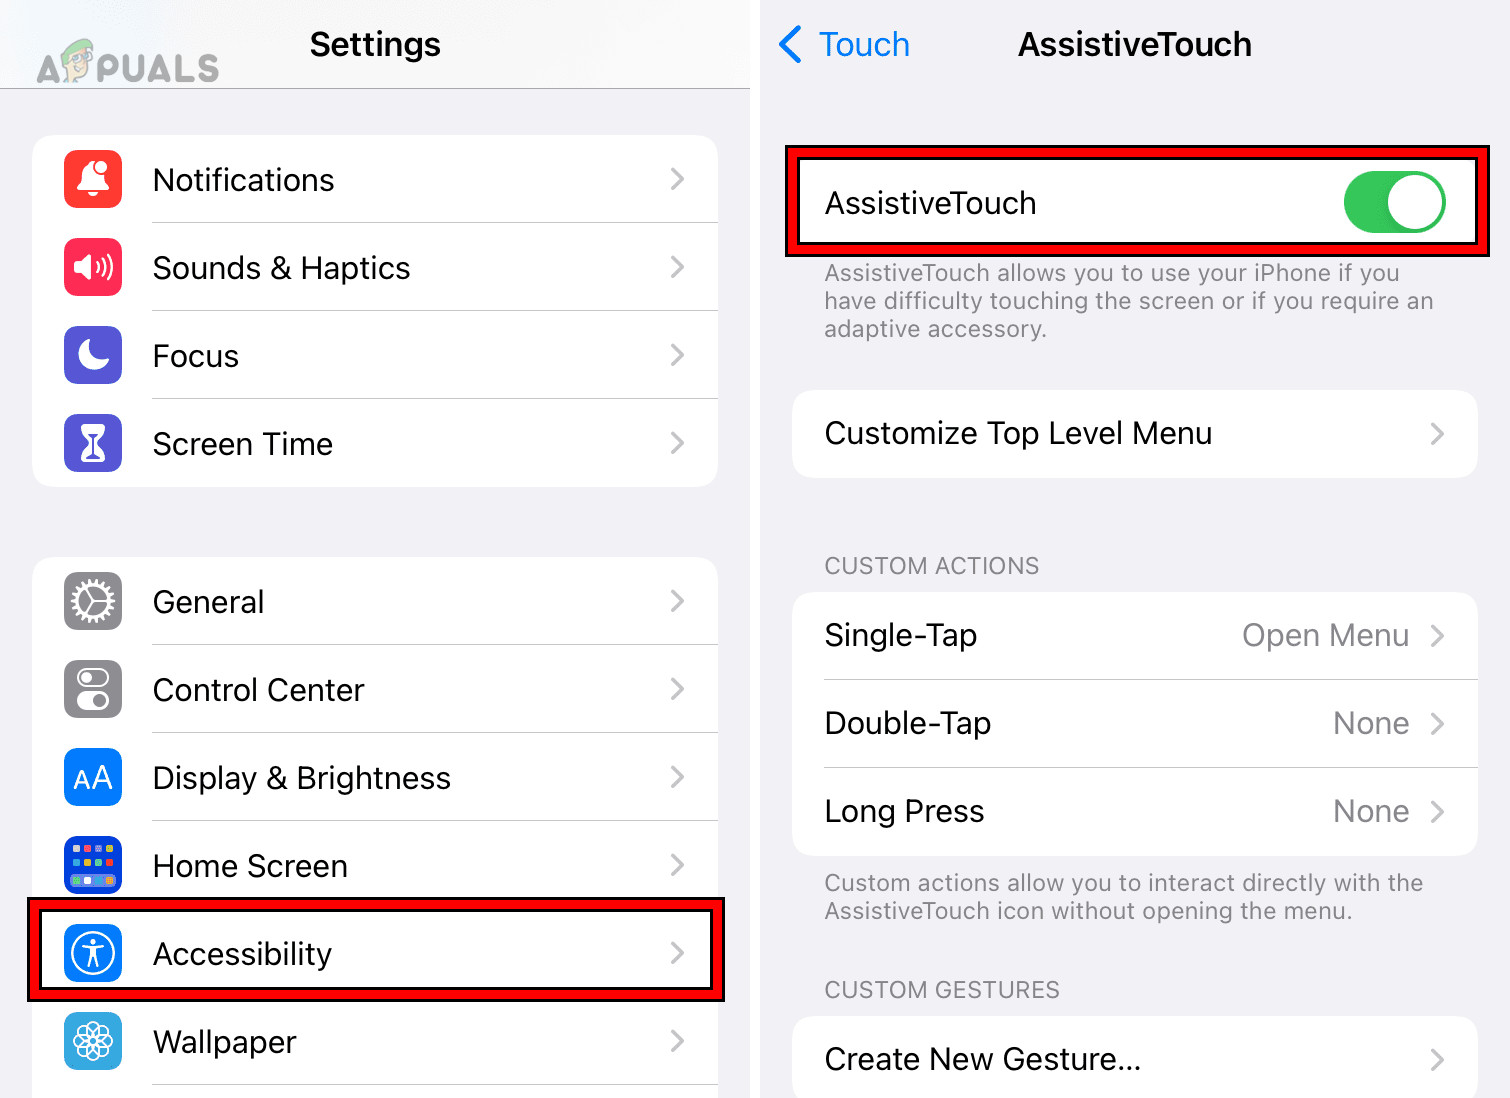 Enable Assistive Touch on the iPhone